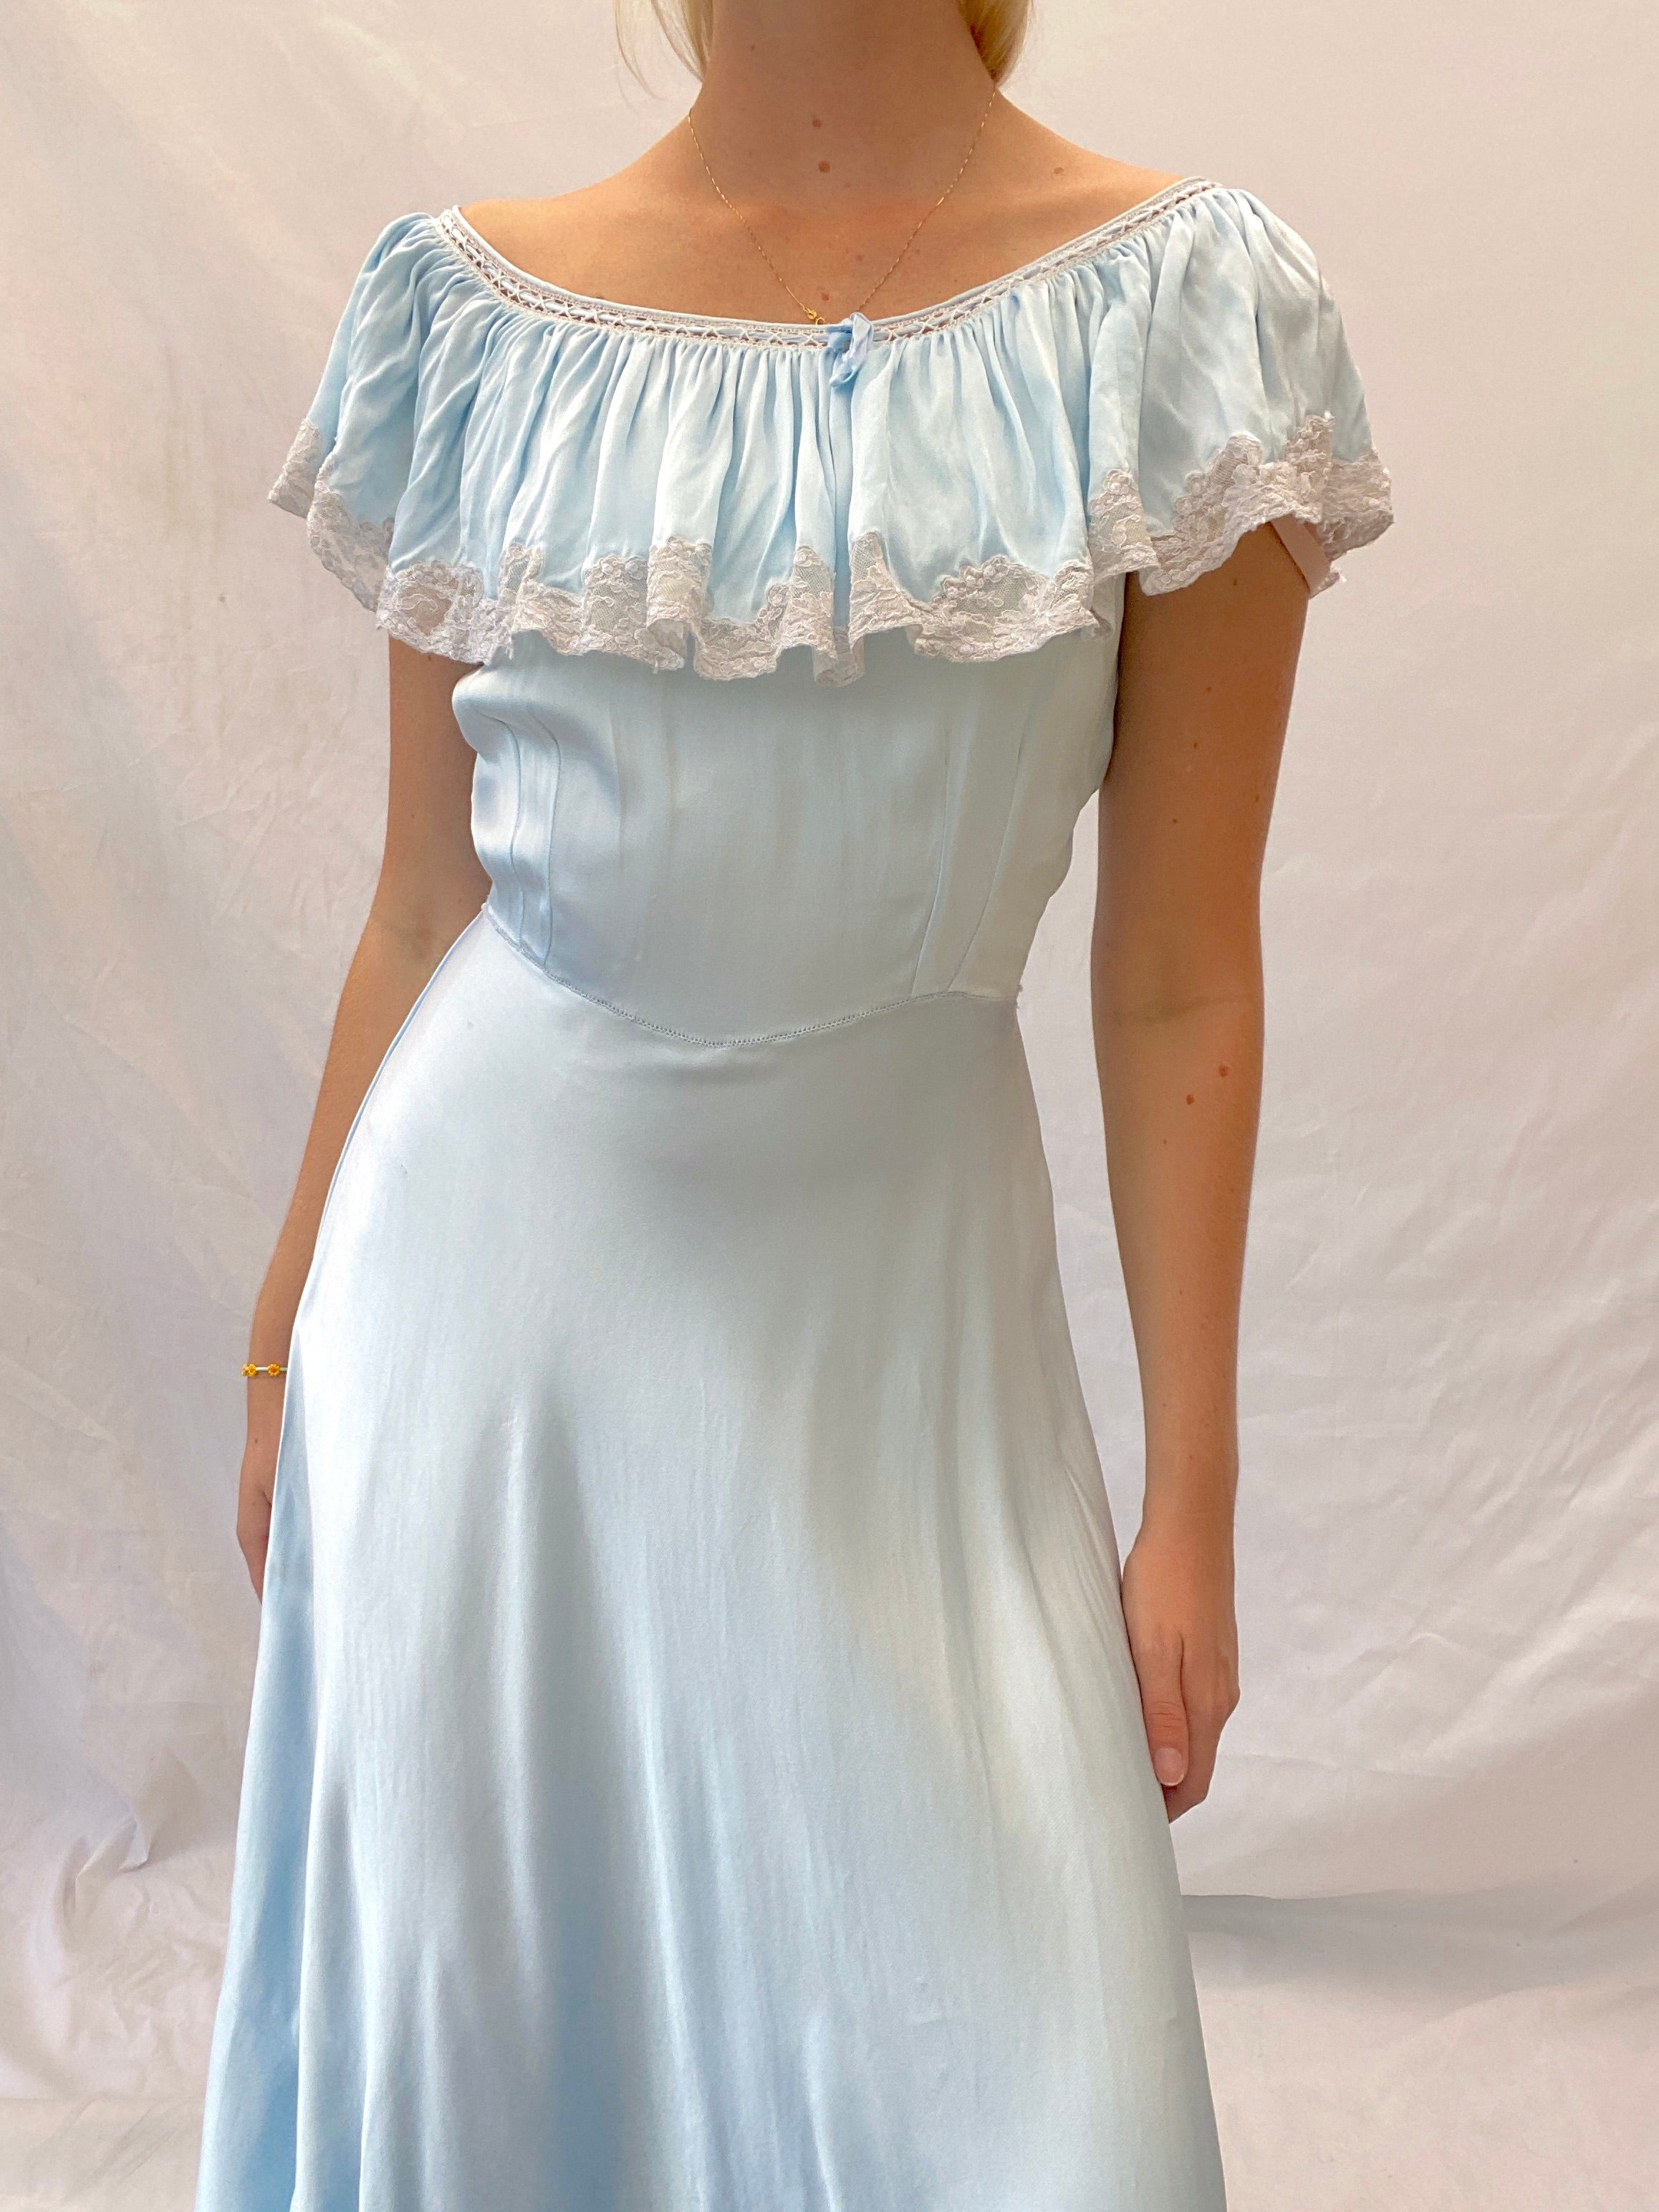 1940's Baby Blue Dress with Lace Trim Ruffle Collar